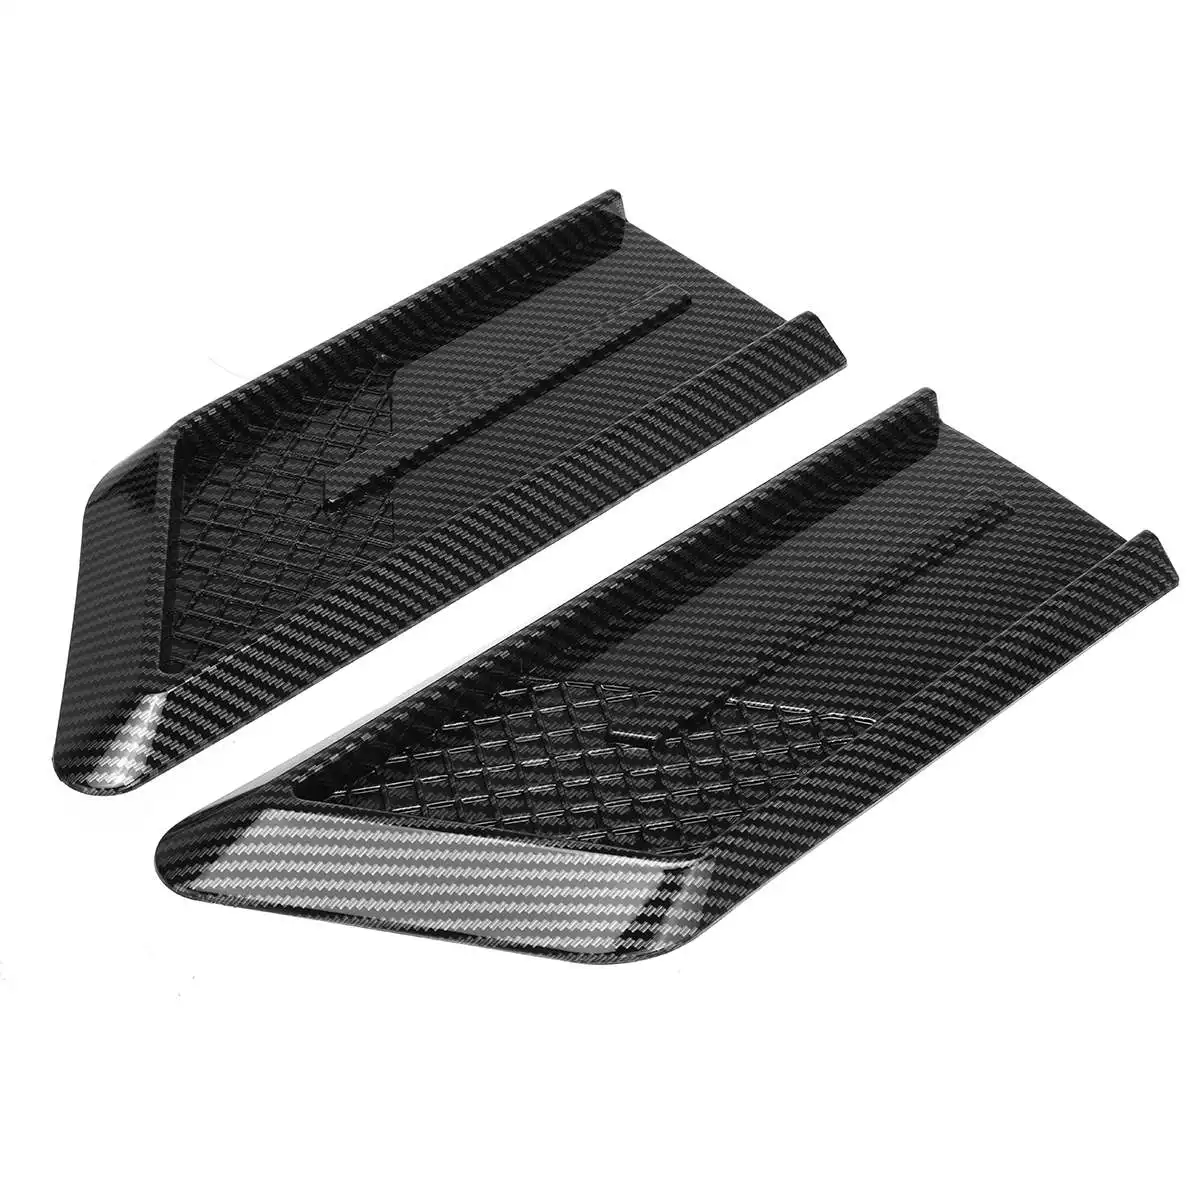 High Quality Universal Car Side Air Wing Scoop Air Flow Intake Vent Cover For Honda For Civic For Accord For SEAT LEON Ibiza MK5